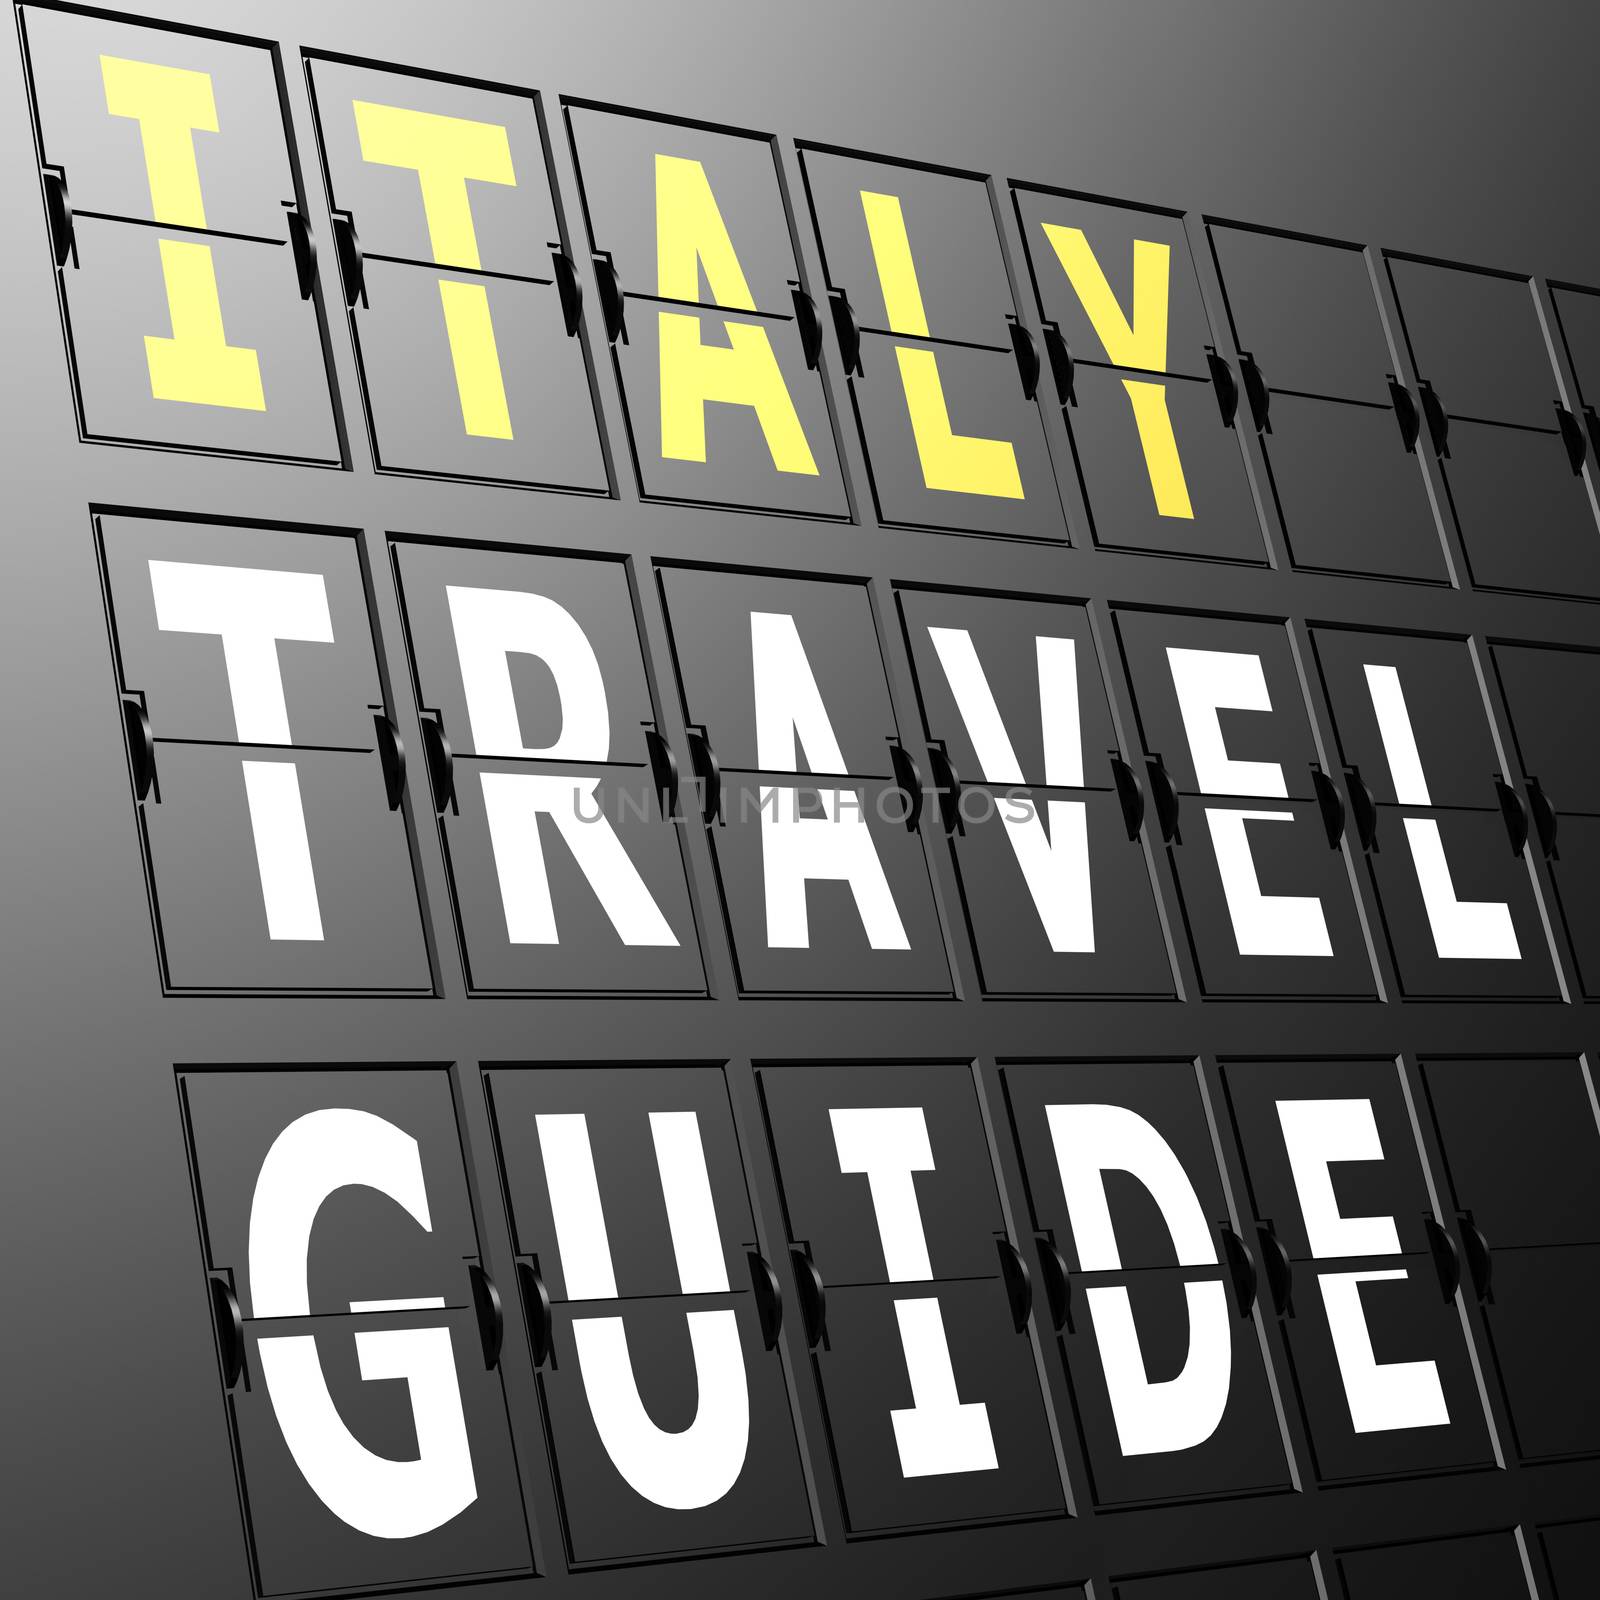 Airport display Italy travel guide by tang90246